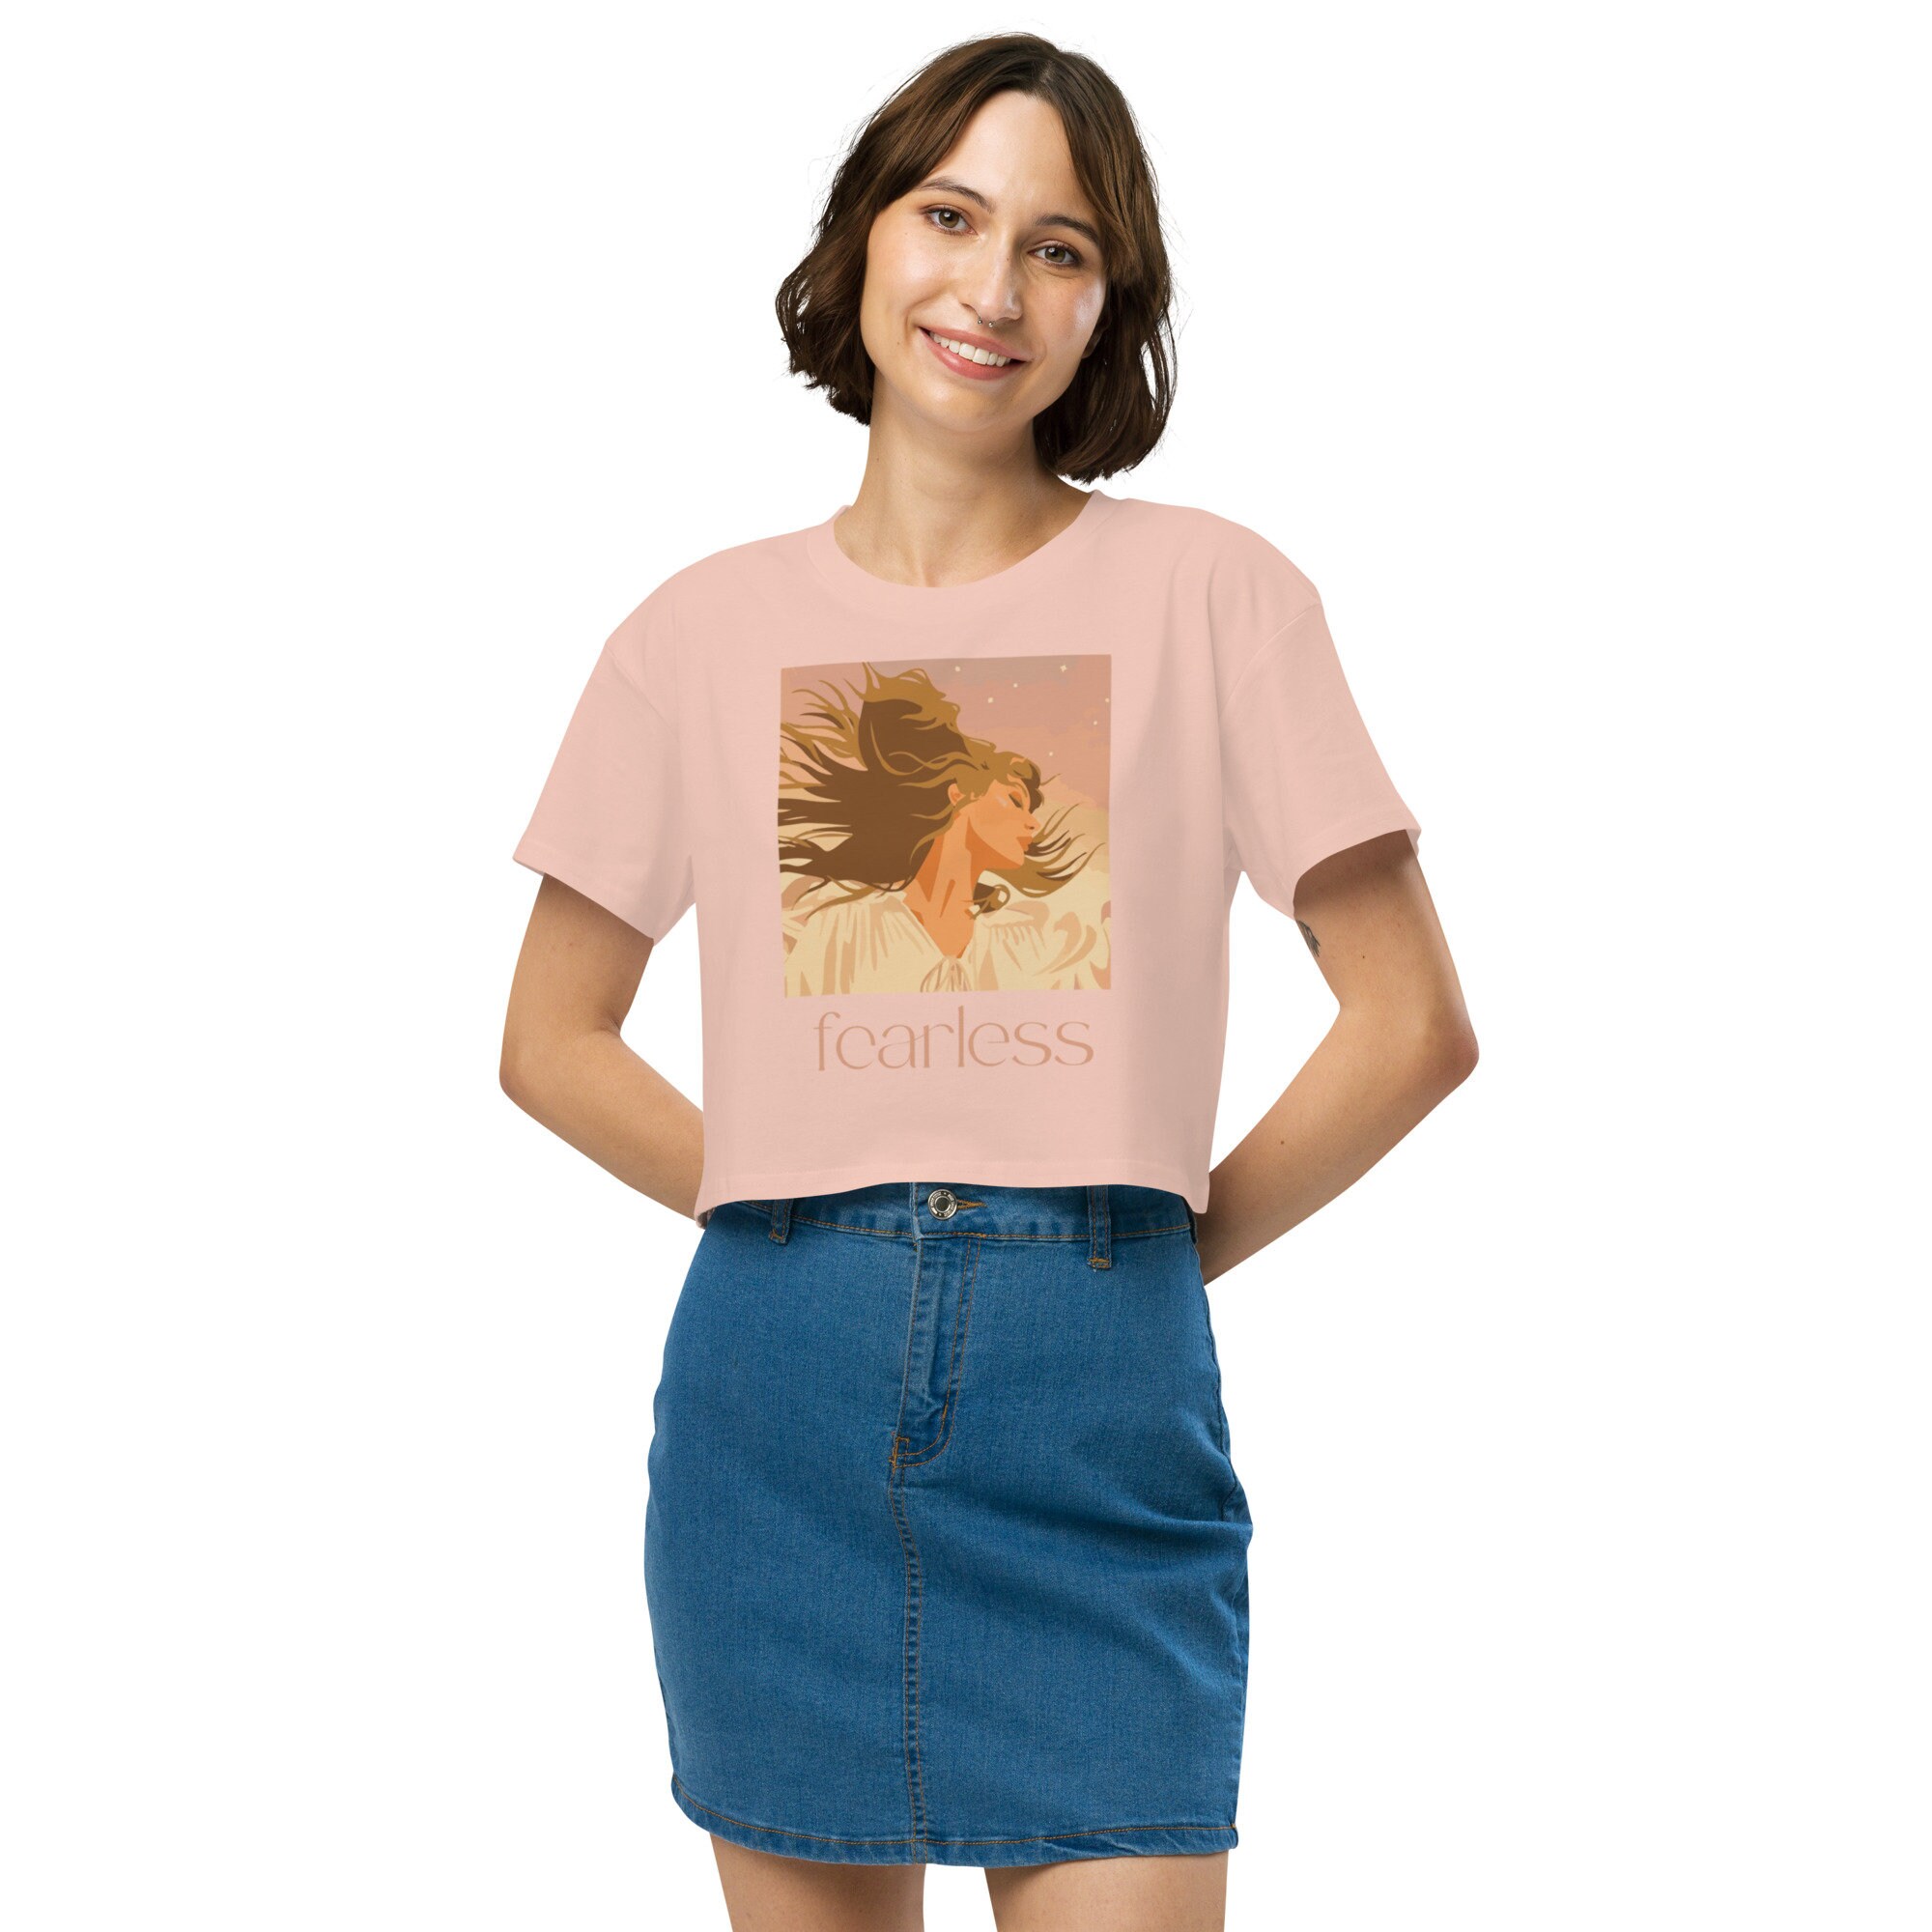 Fearless Taylor Crop Top Shirt, Taylor Flowy Cropped Tee